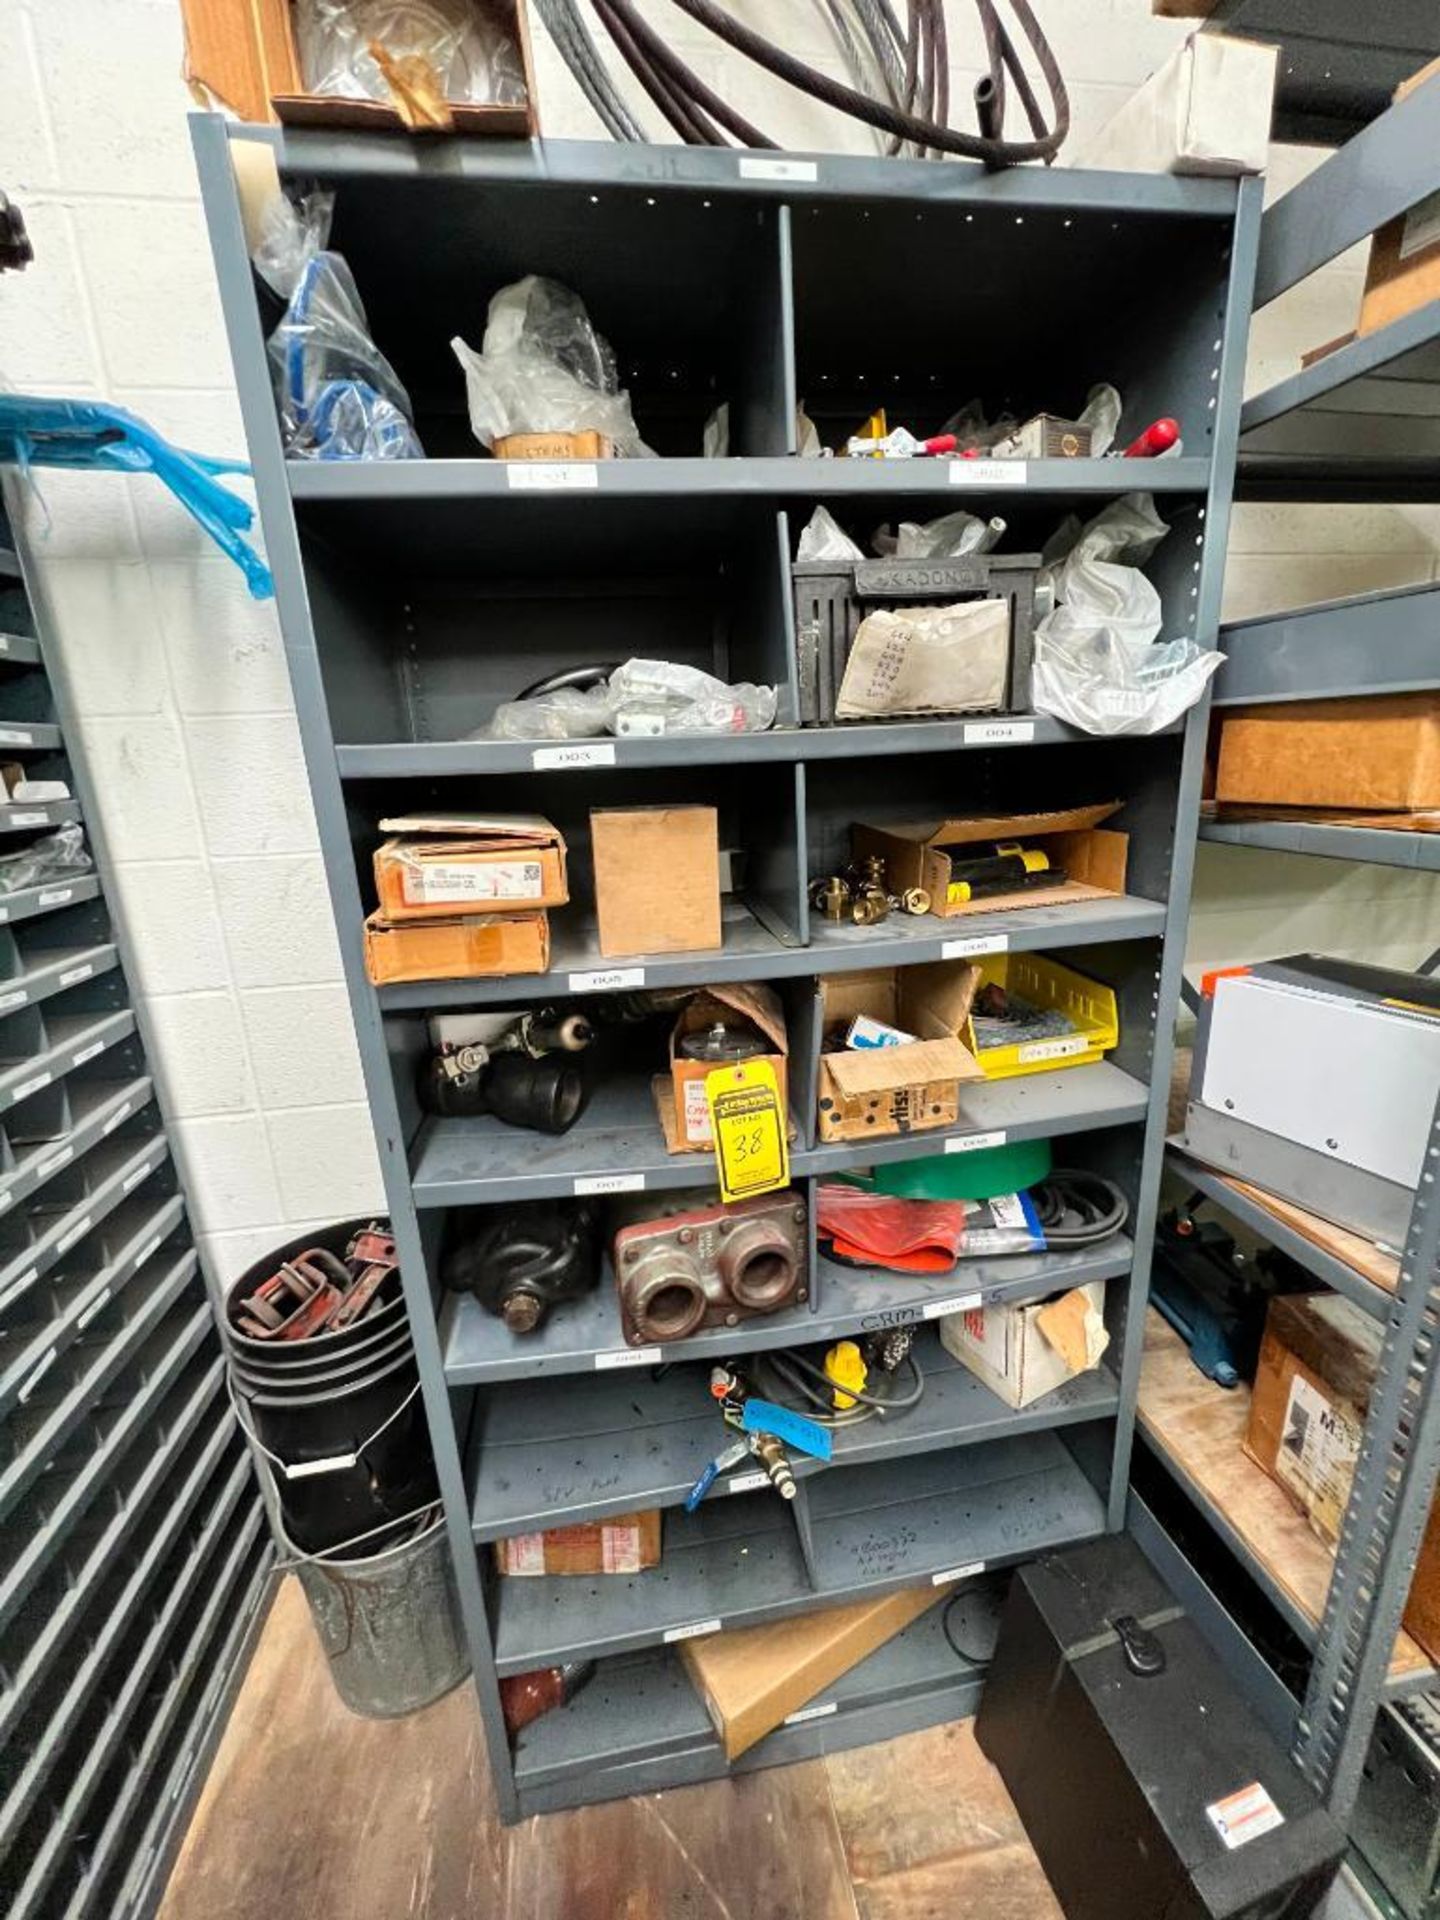 (28) Shelves of Assorted Parts, VERY LARGE LOT Consisting of MRO, Drives, Valves, PLC, Nuts, Bolts, - Image 60 of 67